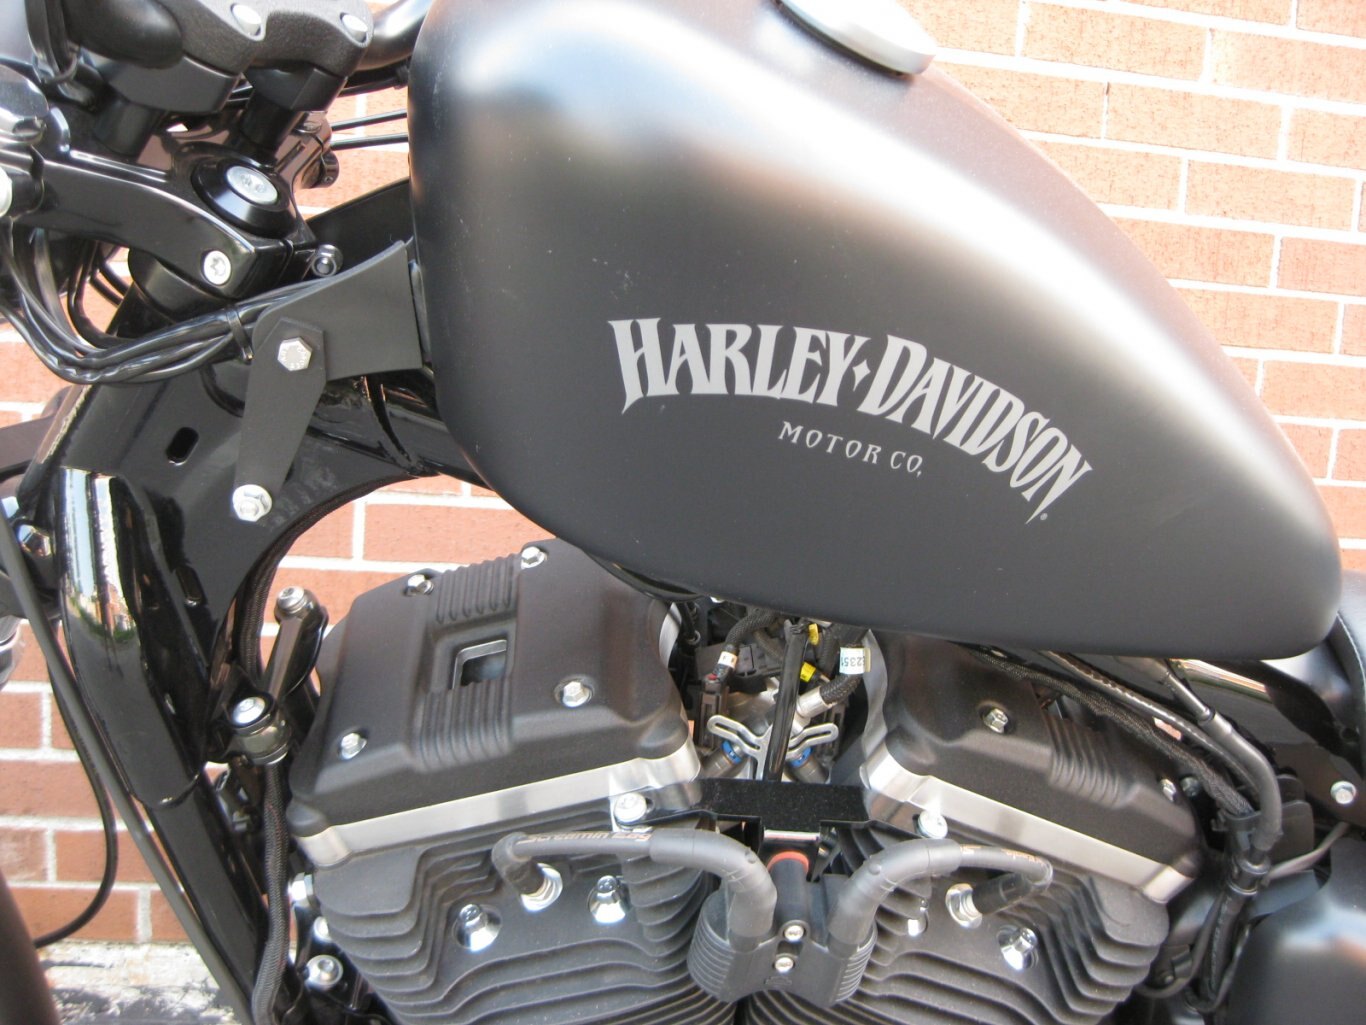 Customized 2020 Harley Davidson XL883N Iron SOLD AND CONGRATS TO TO THE “MYSTERY RIDER”!! WELCOME TO THE “DARK SIDE” ON THIS “DARK HORSE” MUSCLE HARLEY DAVIDSON IRON TWO WHEEL FREEDOM MACHINE WITH THANKS FROM GARY & TEAM CYCLE WORLD!!!!